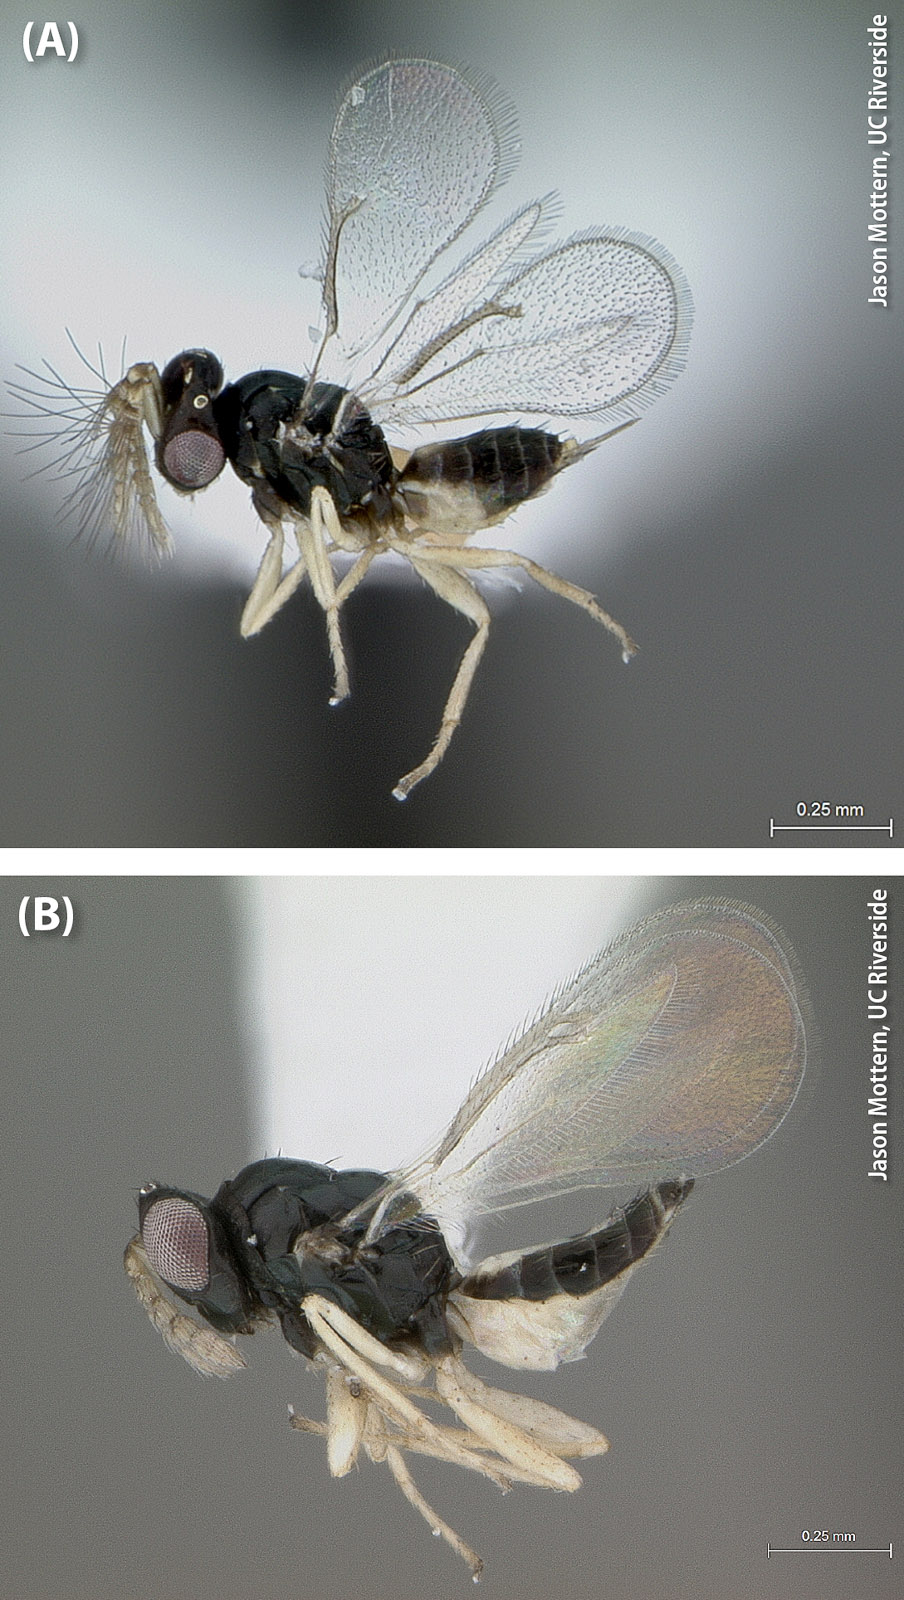 Adult Tamarixia radiata (A) male and (B) female. The latter kill Asian citrus psyllid nymphs through a combination of parasitism and host feeding.